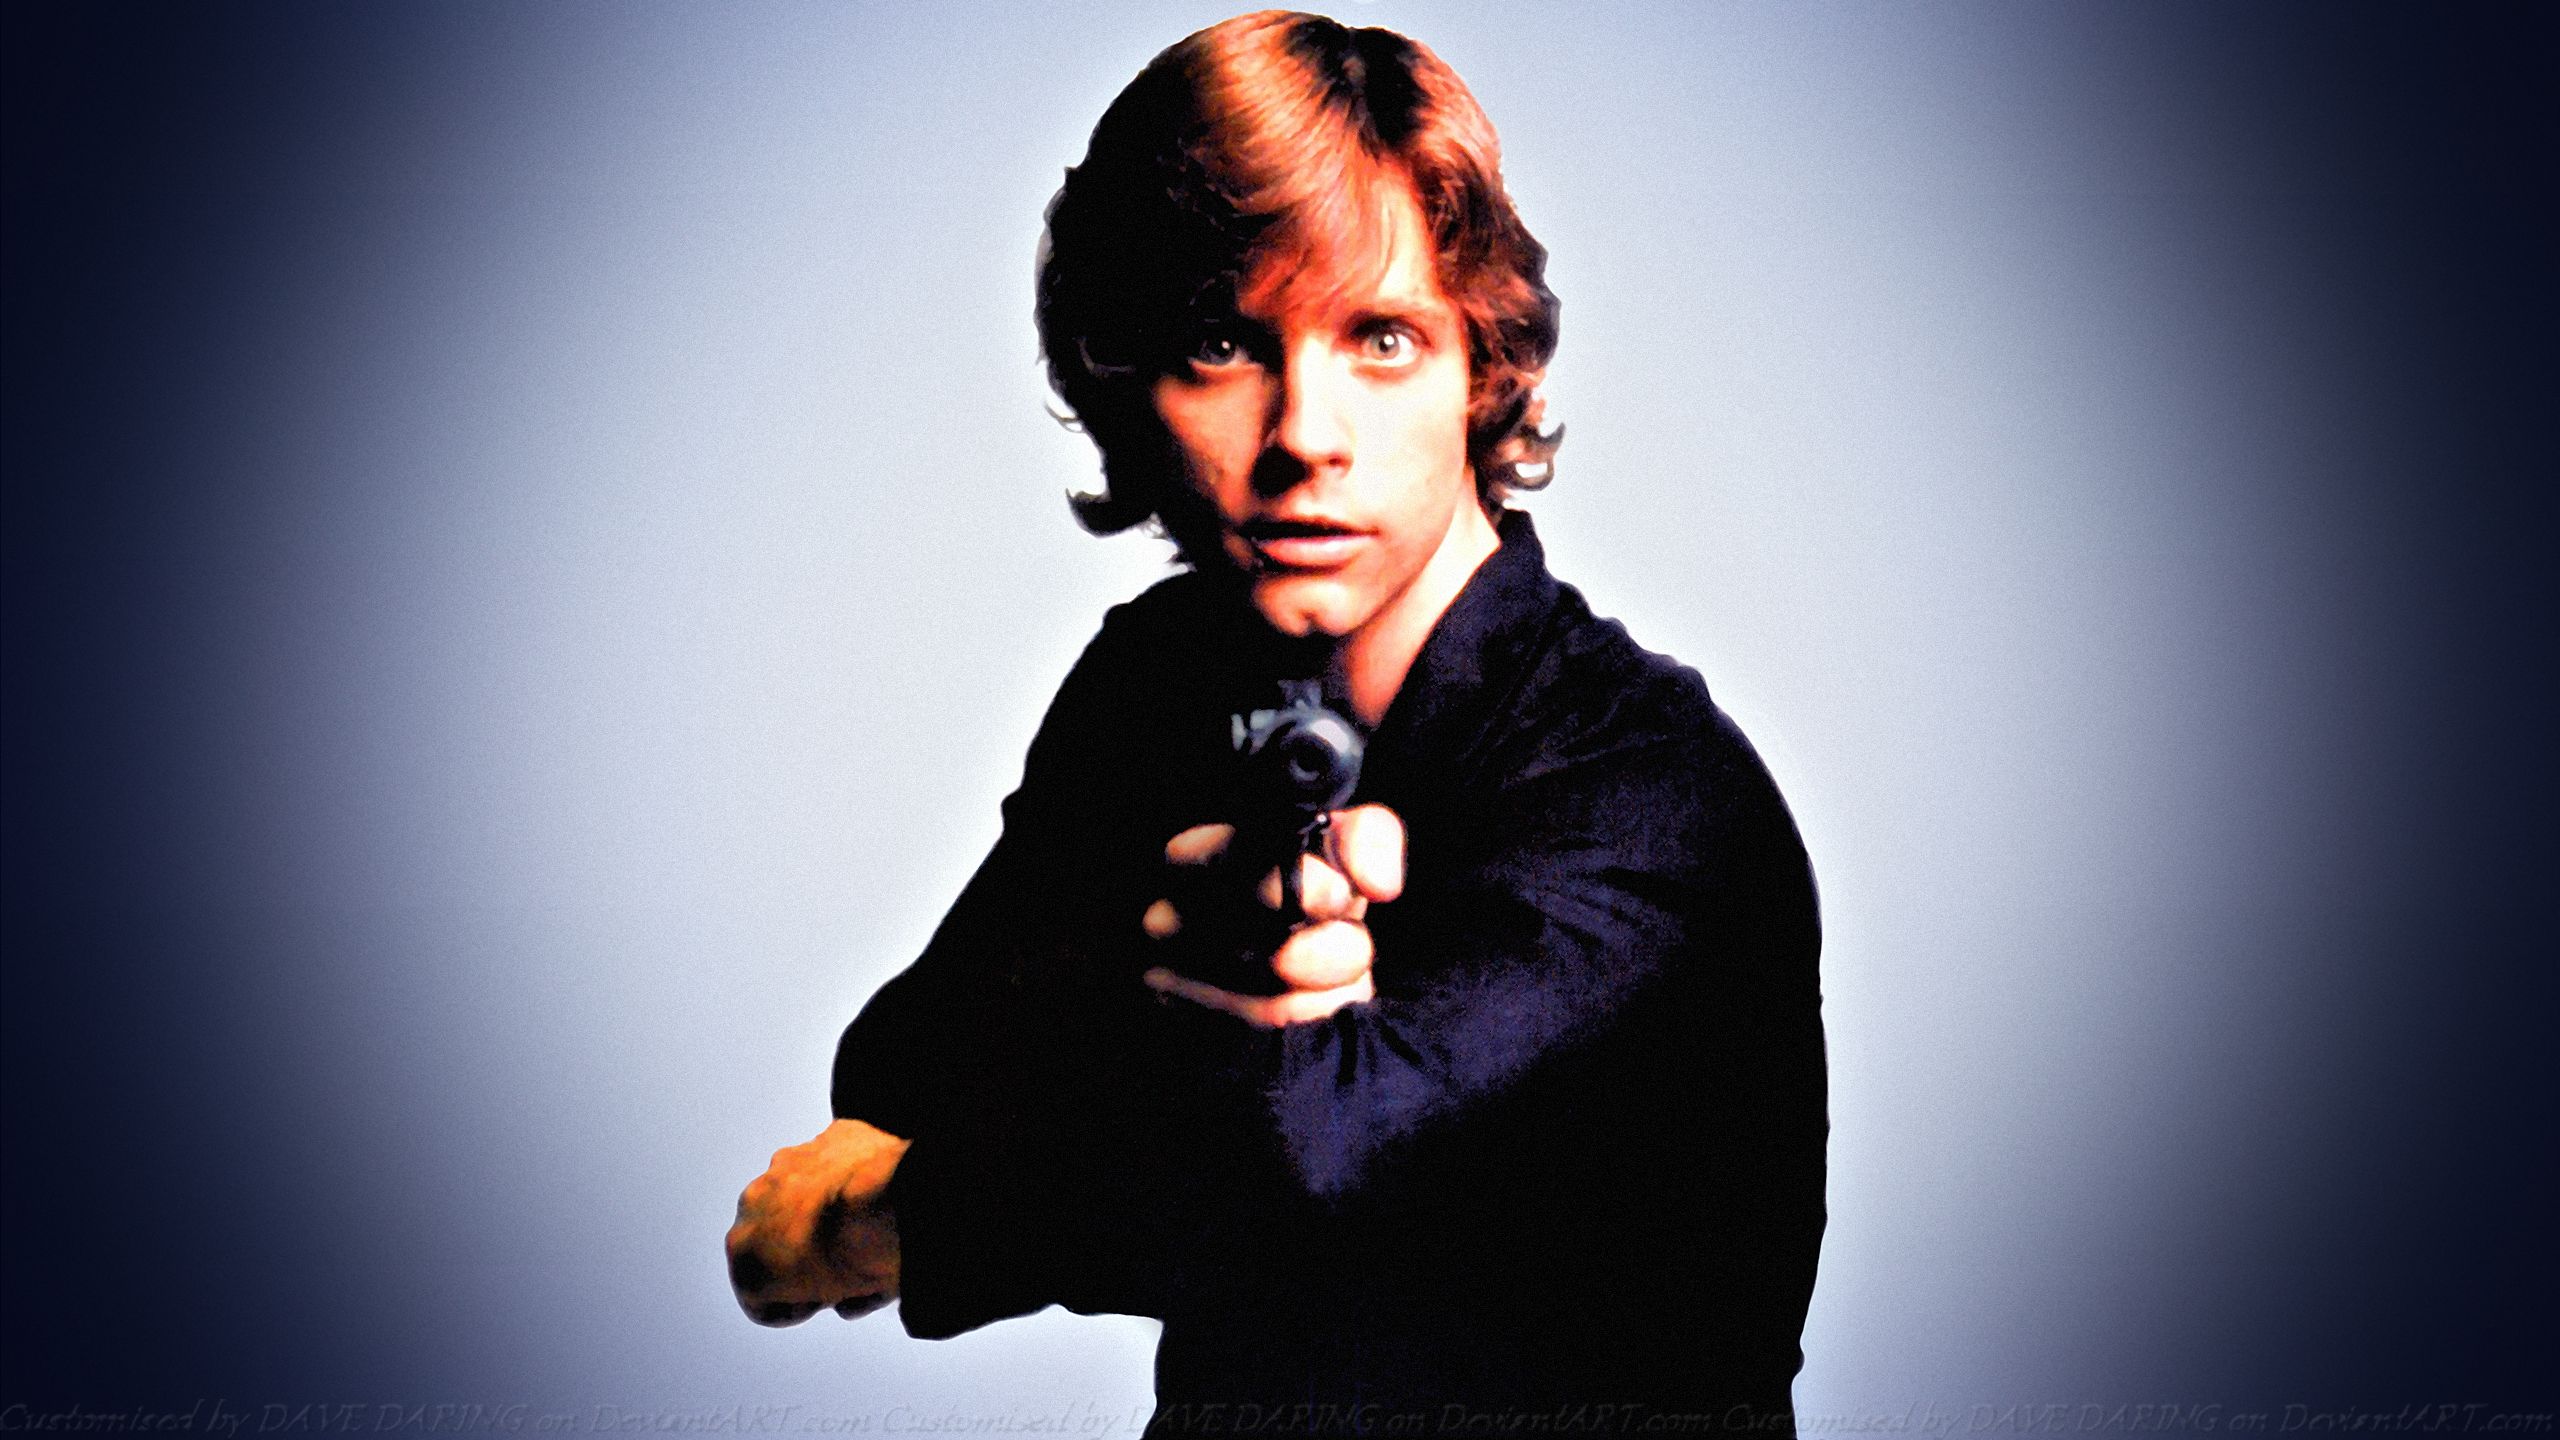 Mark Hamill Wallpaper High Resolution And Quality